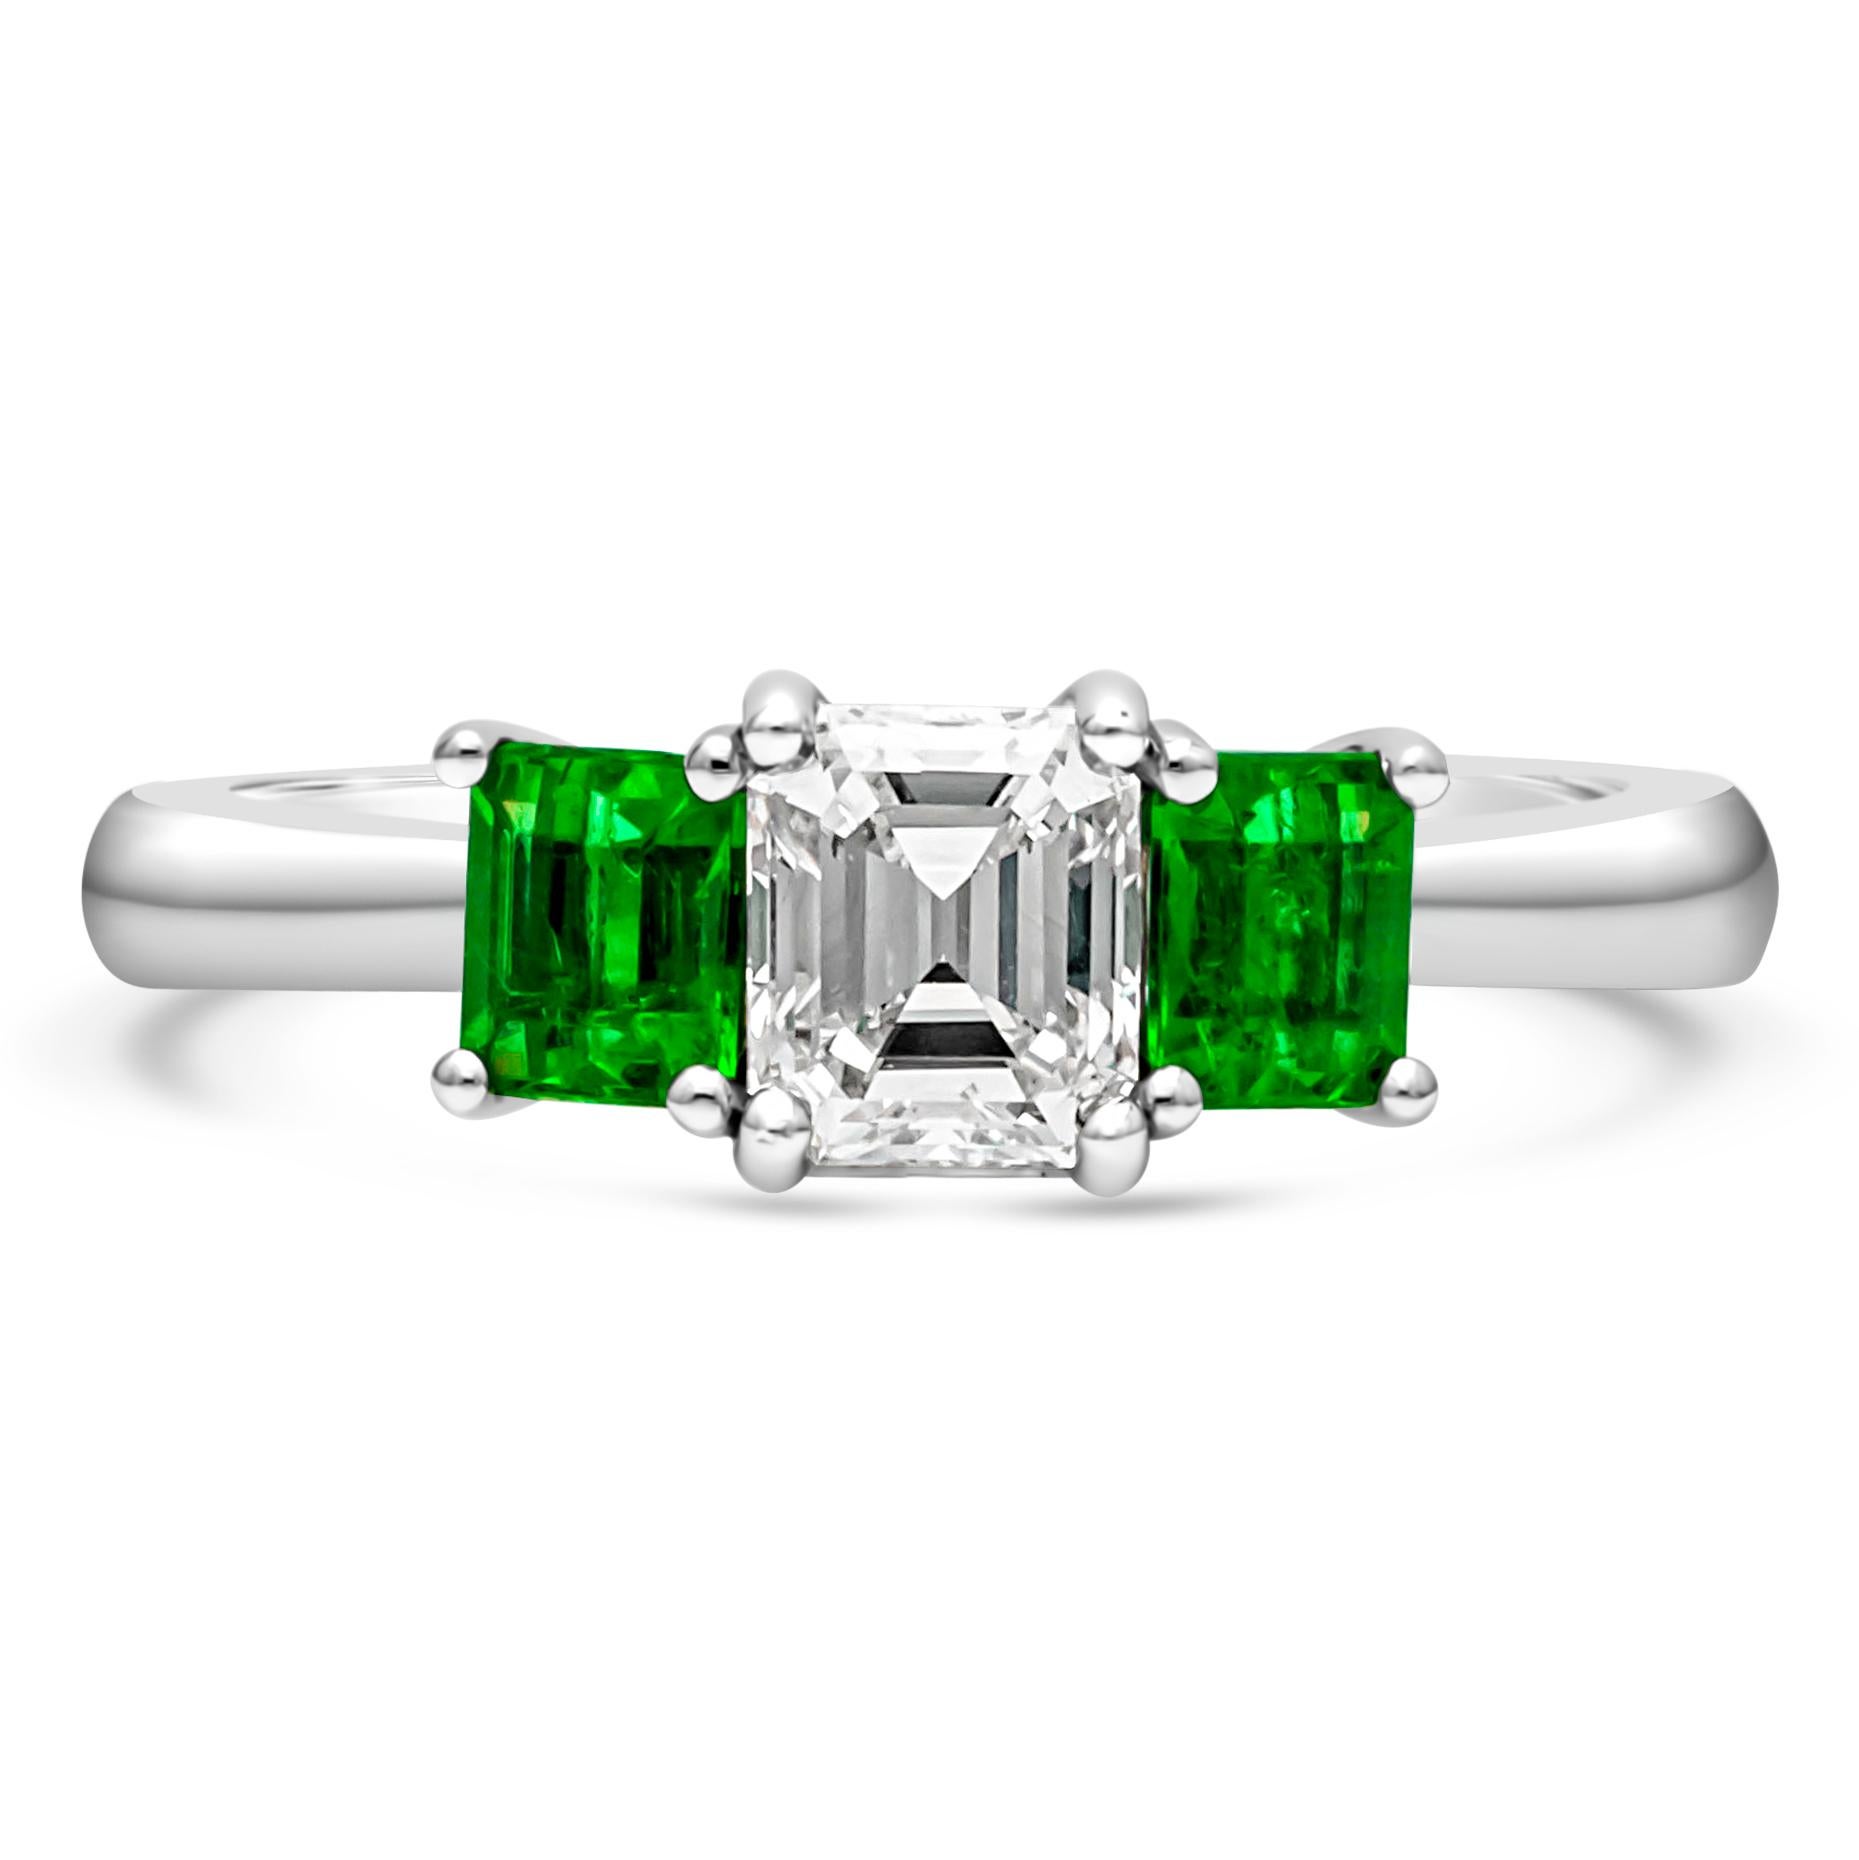 A simple three-stone engagement ring style, showcasing a 0.71 carat emerald cut diamond certified by GIA as F color and VS2 clarity. Flanked by emerald cut green emeralds weighing 0.60 carat total. Each stone is set on a four prong open gallery